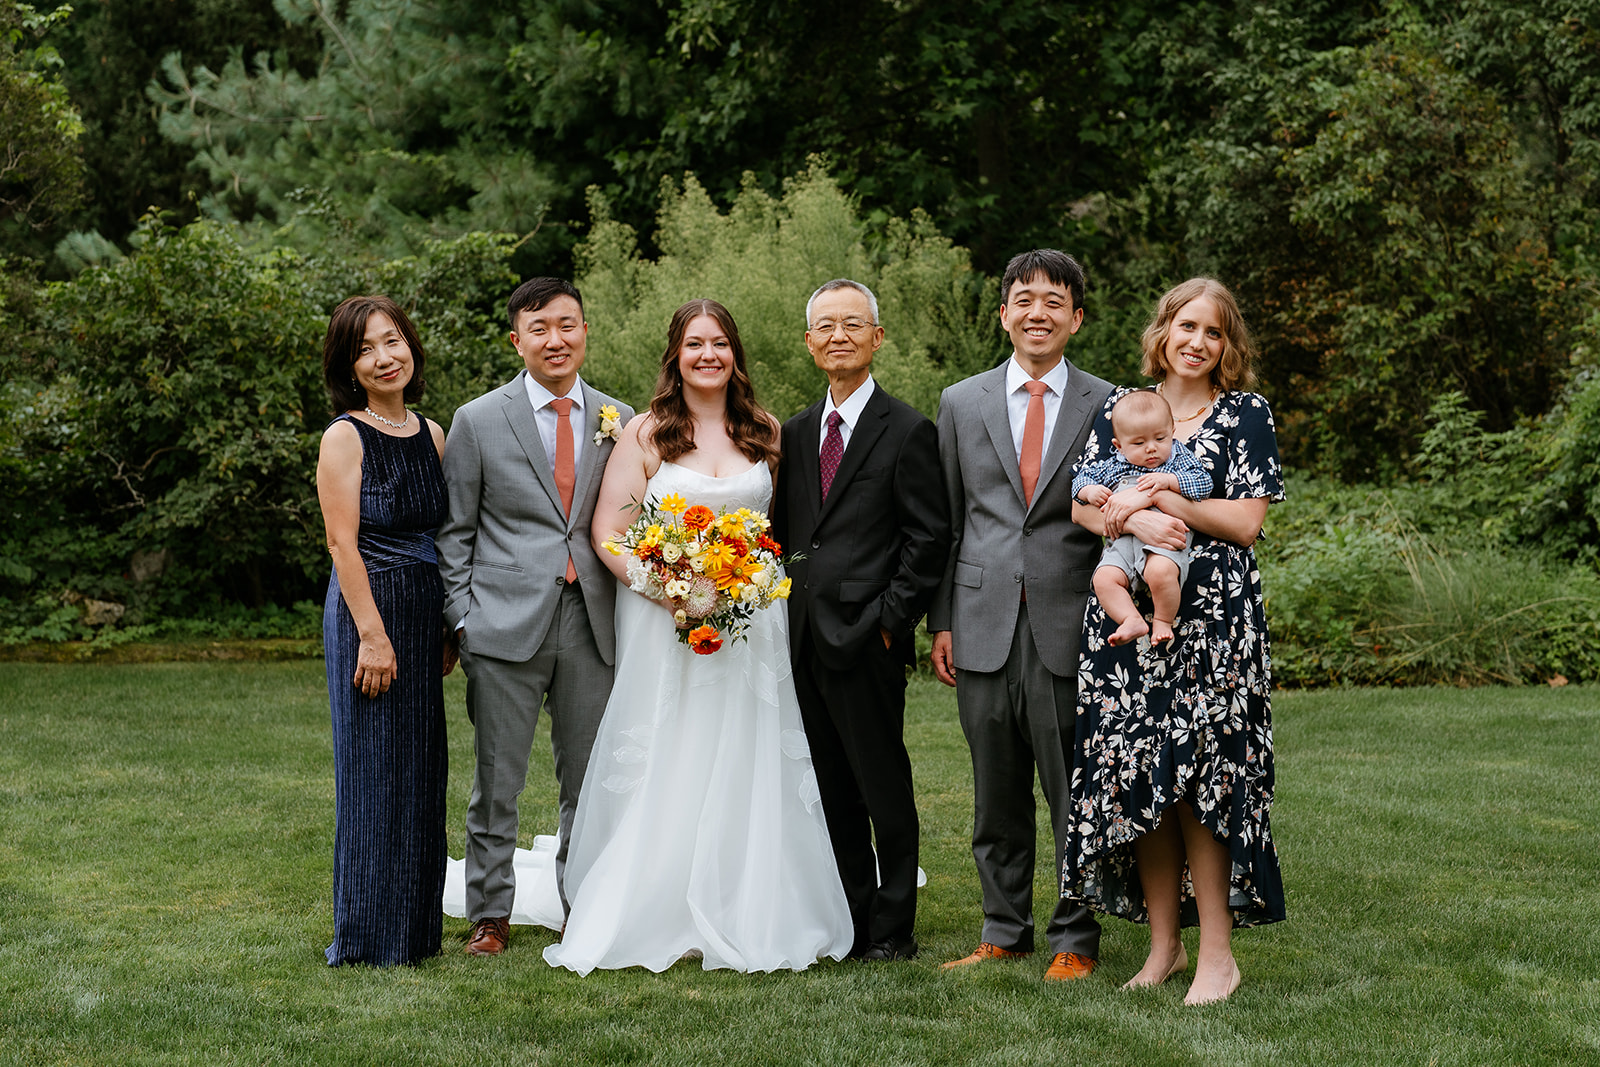 A family posing together at a wedding, featuring a bride holding a bouquet, flanked by older relatives, a man, and a woman holding a baby.